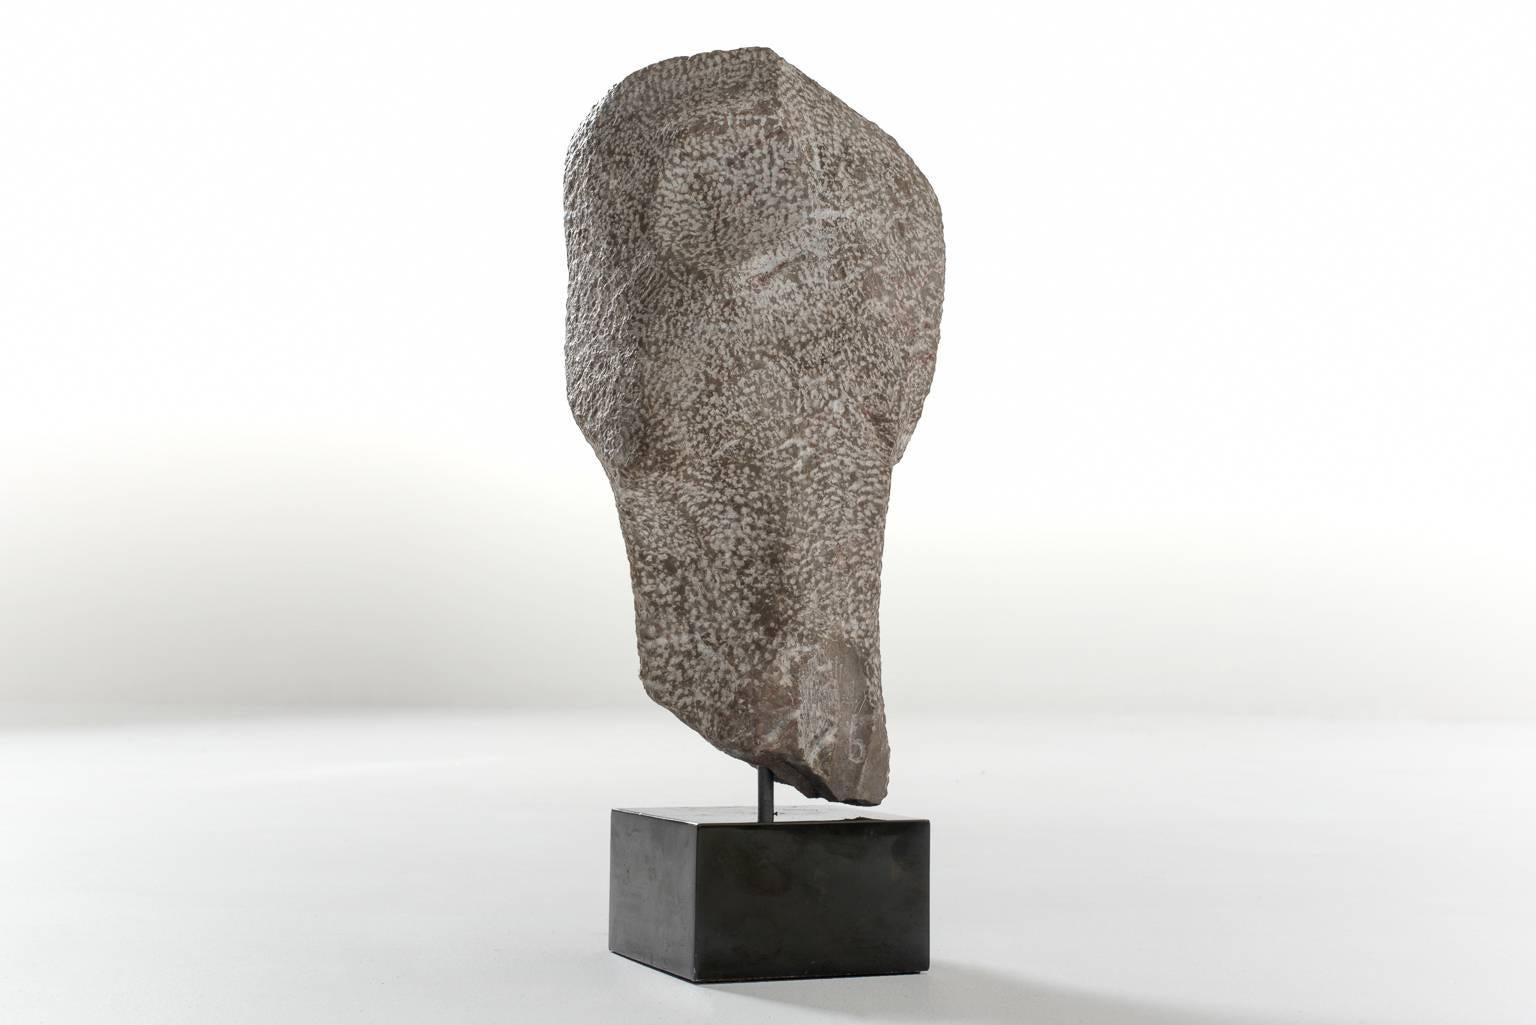 European Abstract ‘Head’ Sculpture in Natural Stone